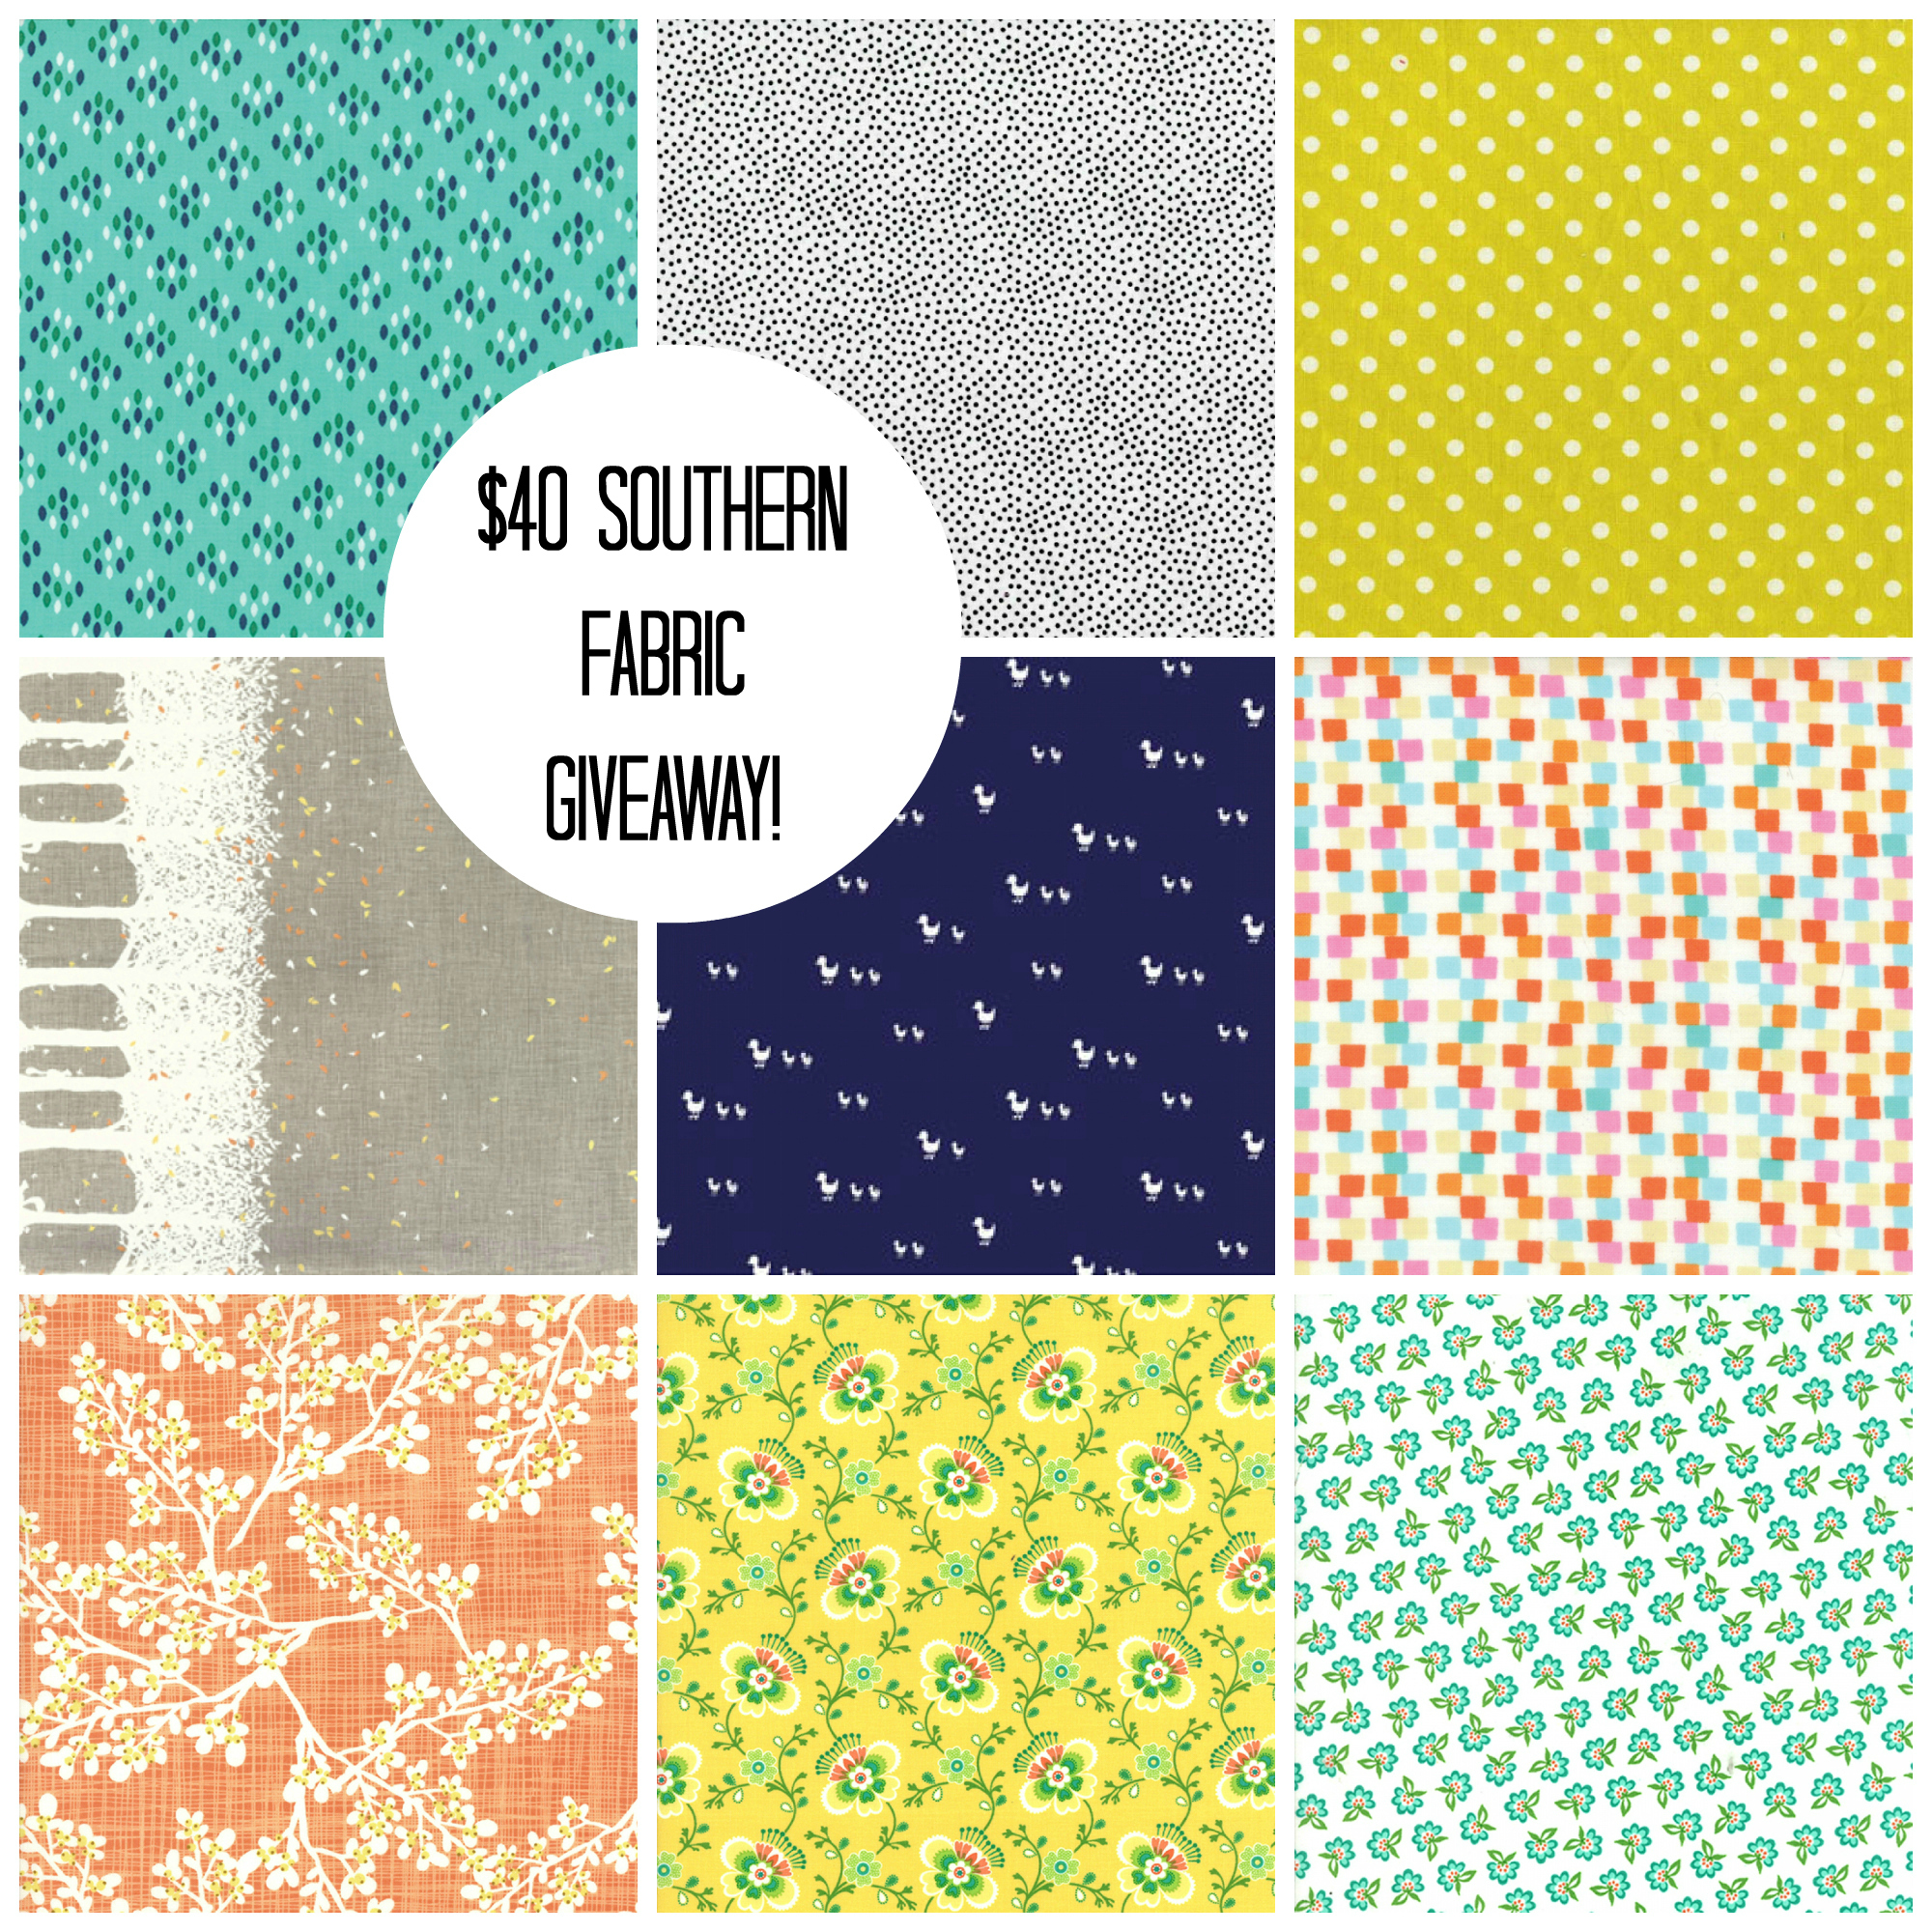 southernfabriccollage